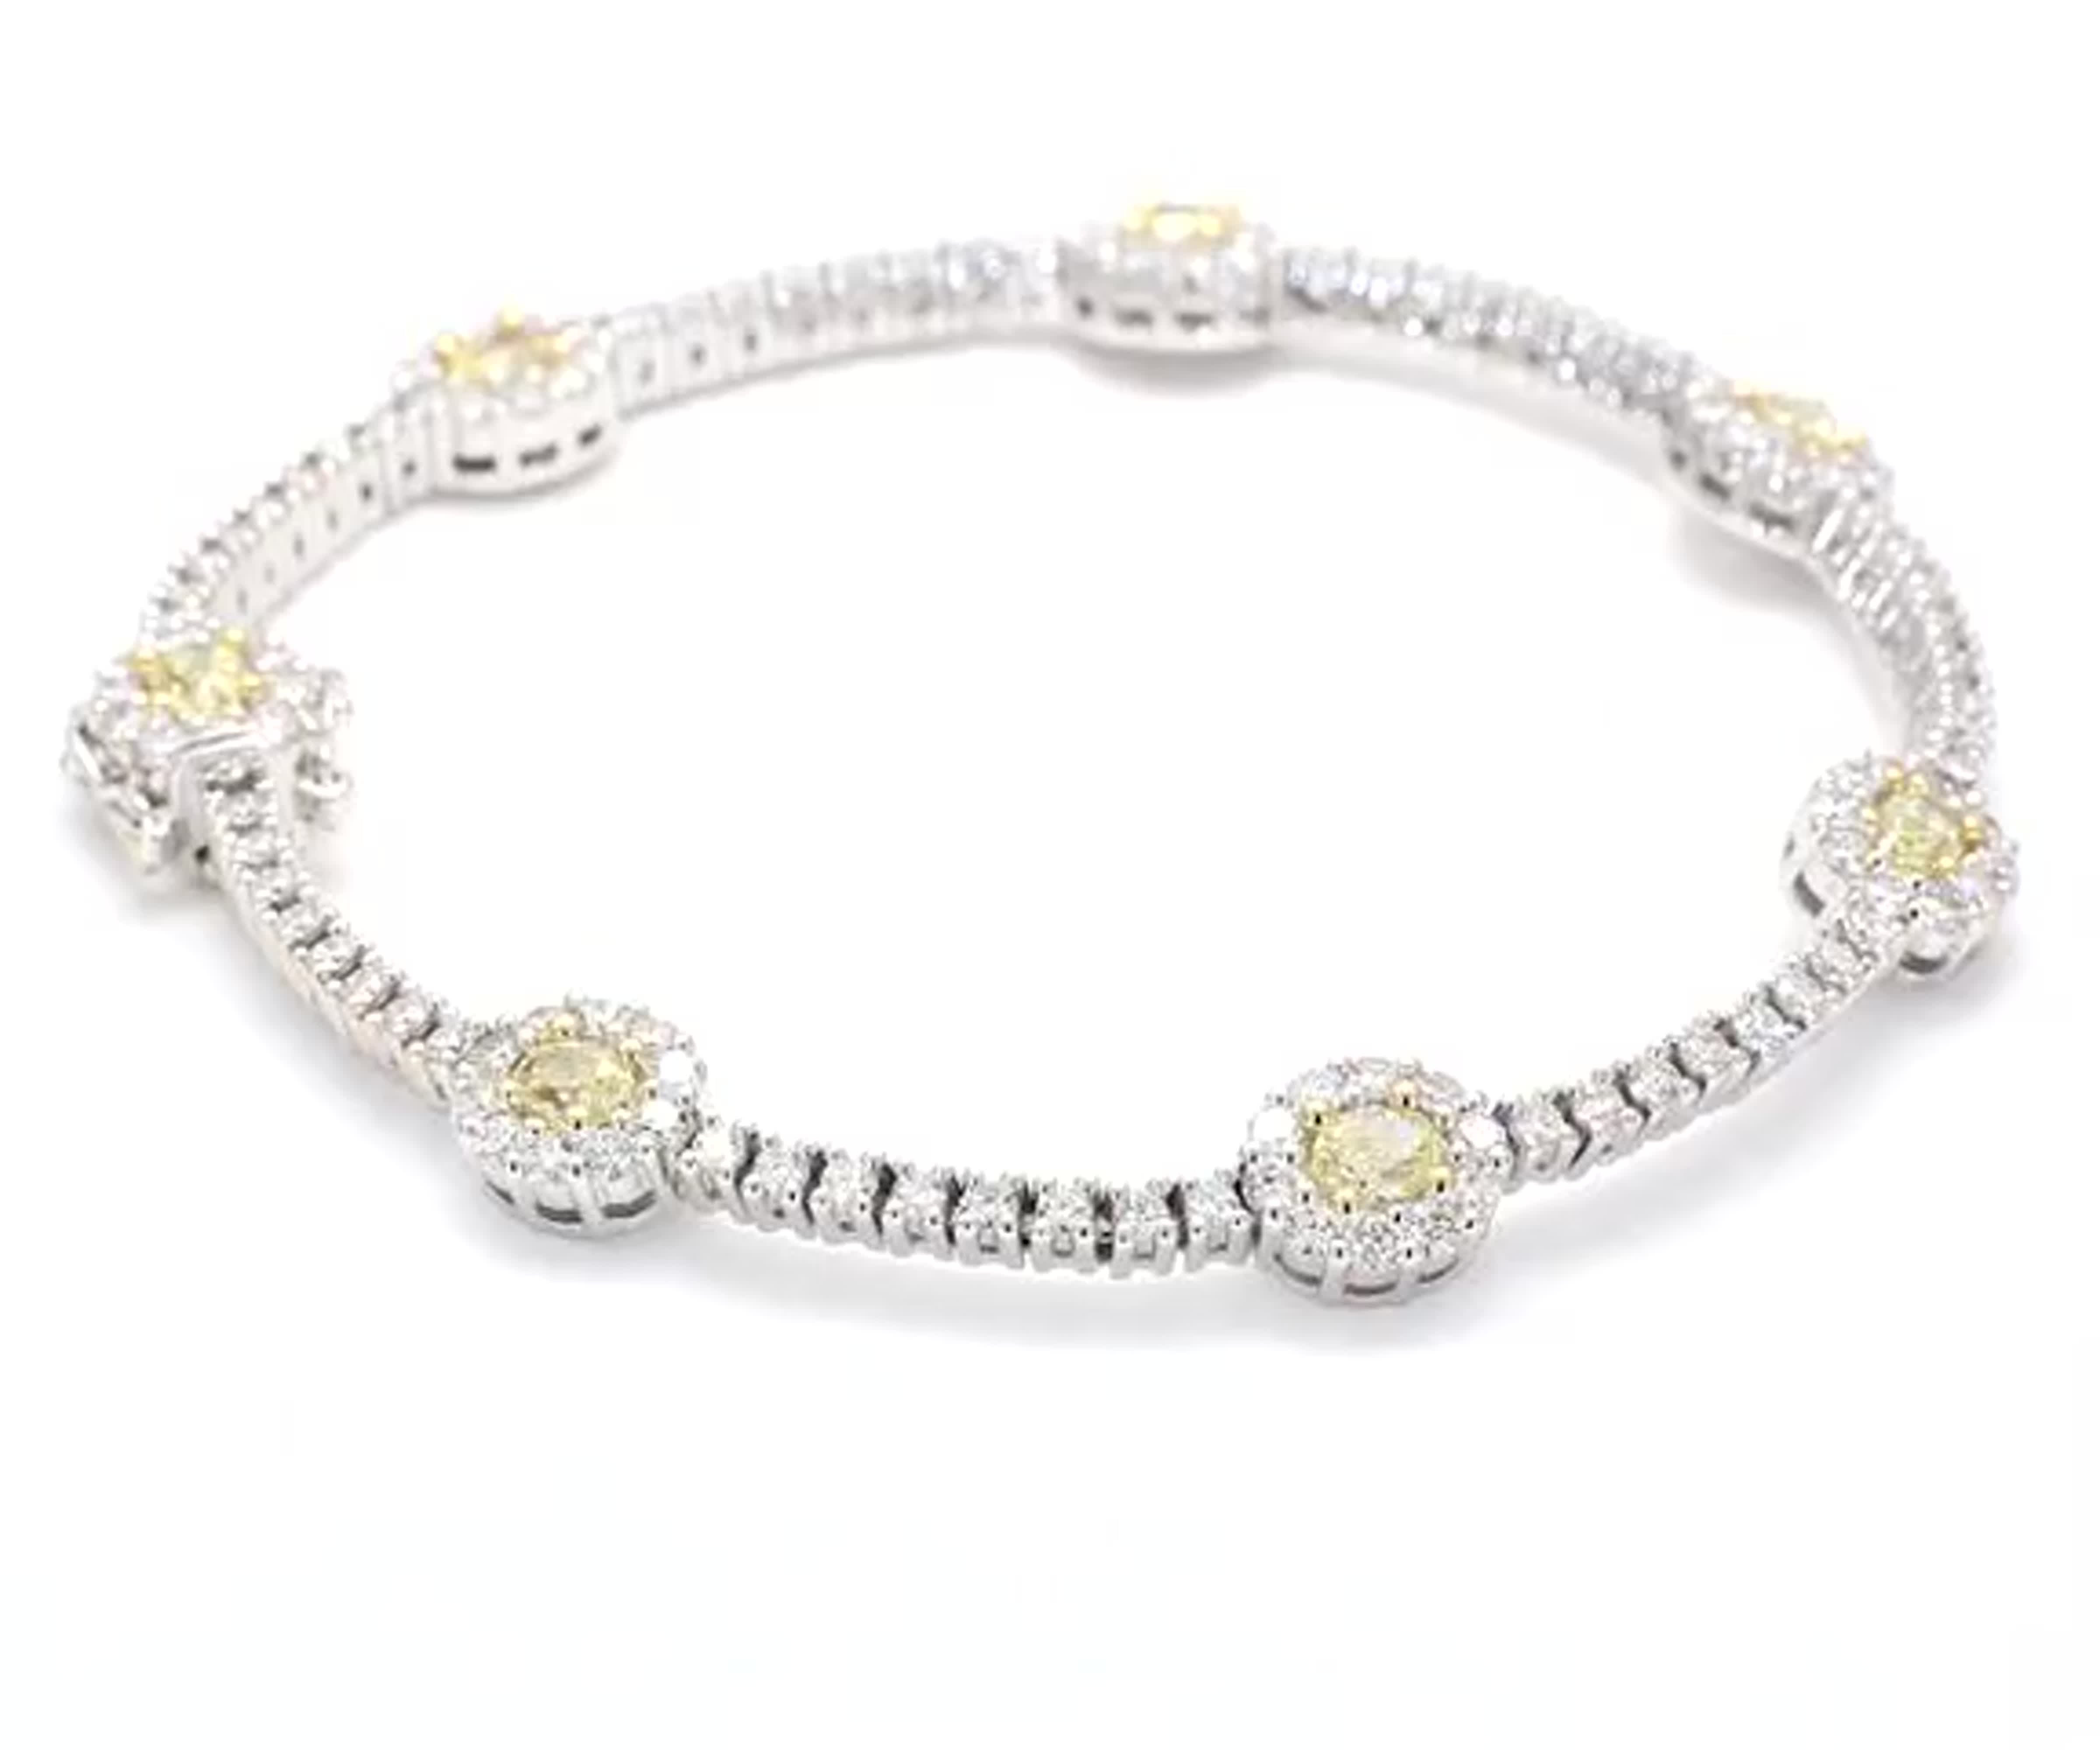 Natural Yellow Oval and White Diamond 4.62 Carat TW Gold Bracelet